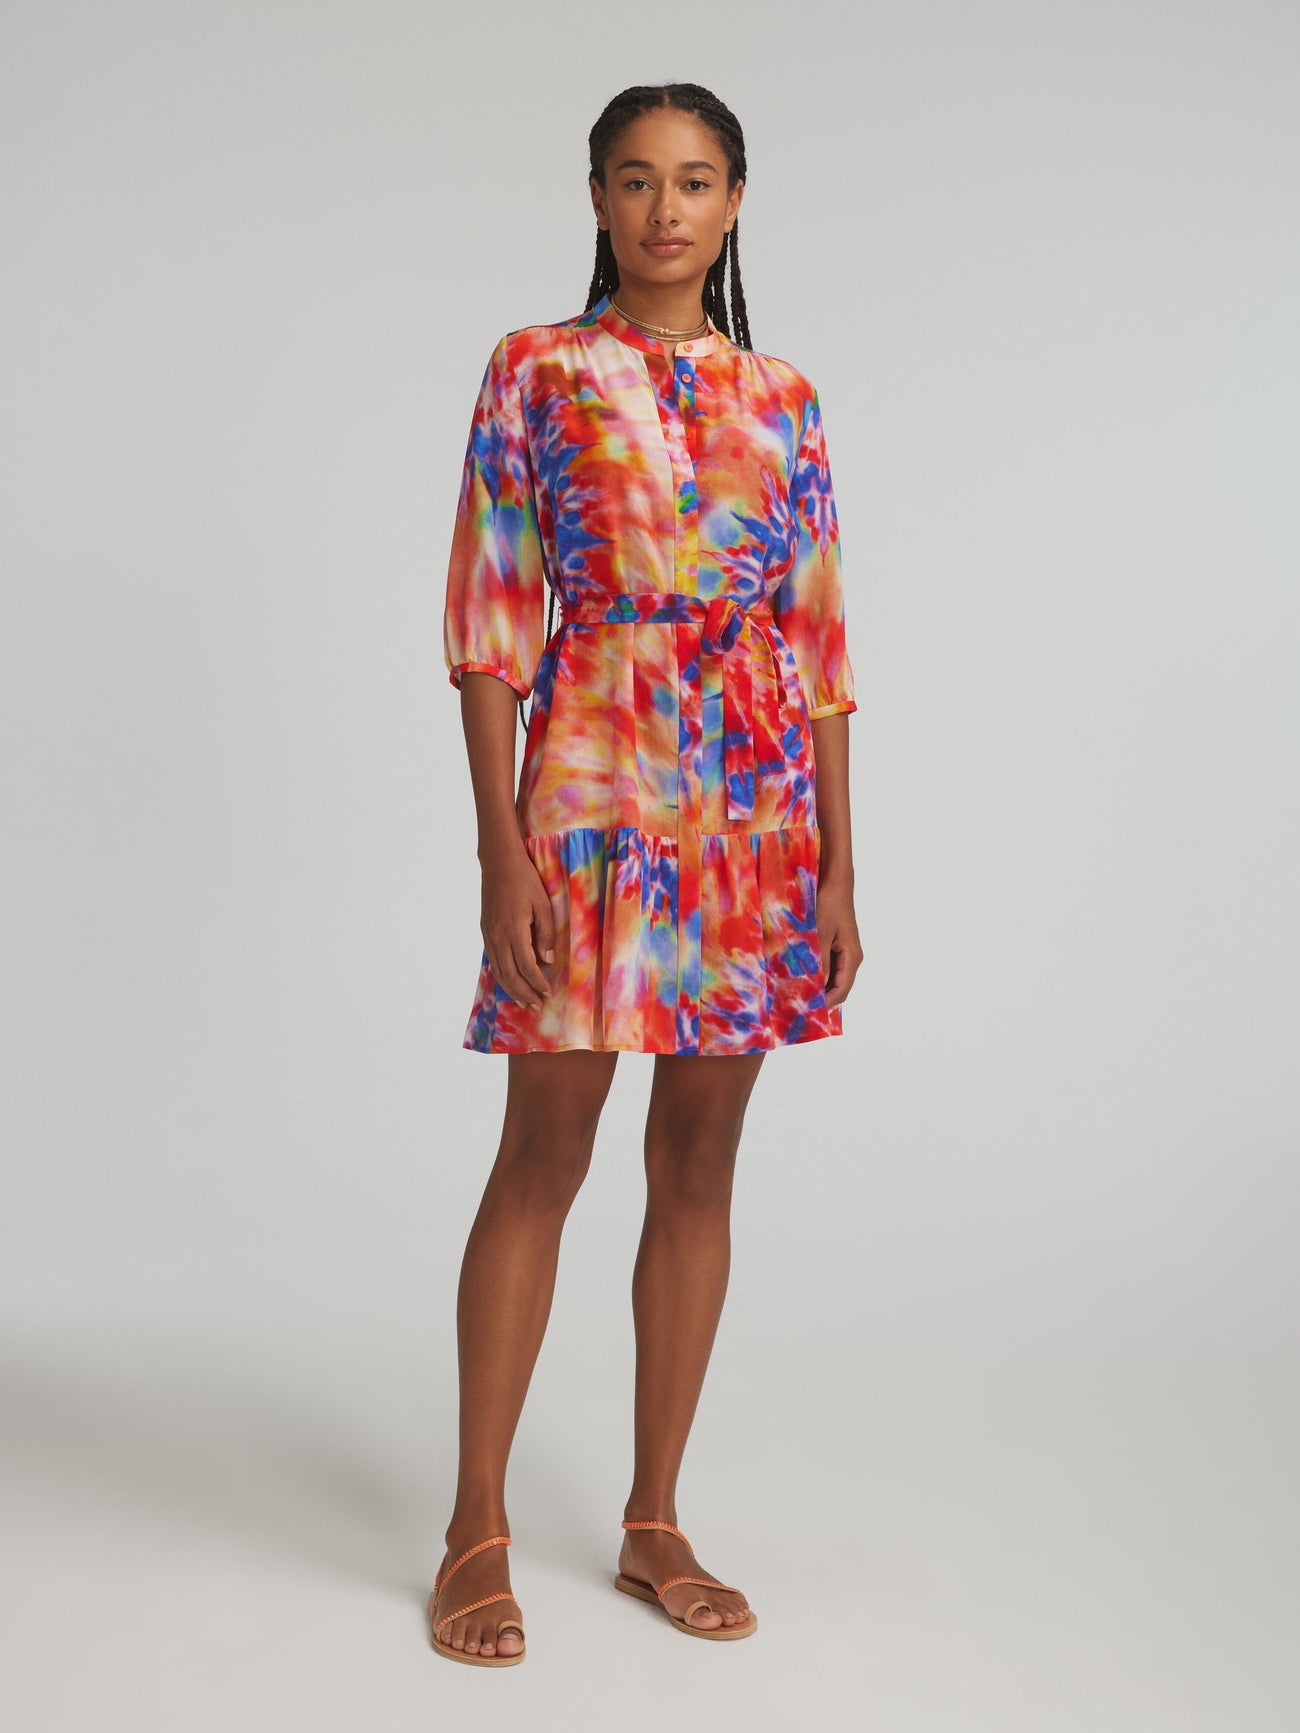 Load image into Gallery viewer, Venyx Tyra Dress in Prismatic Tie Dye